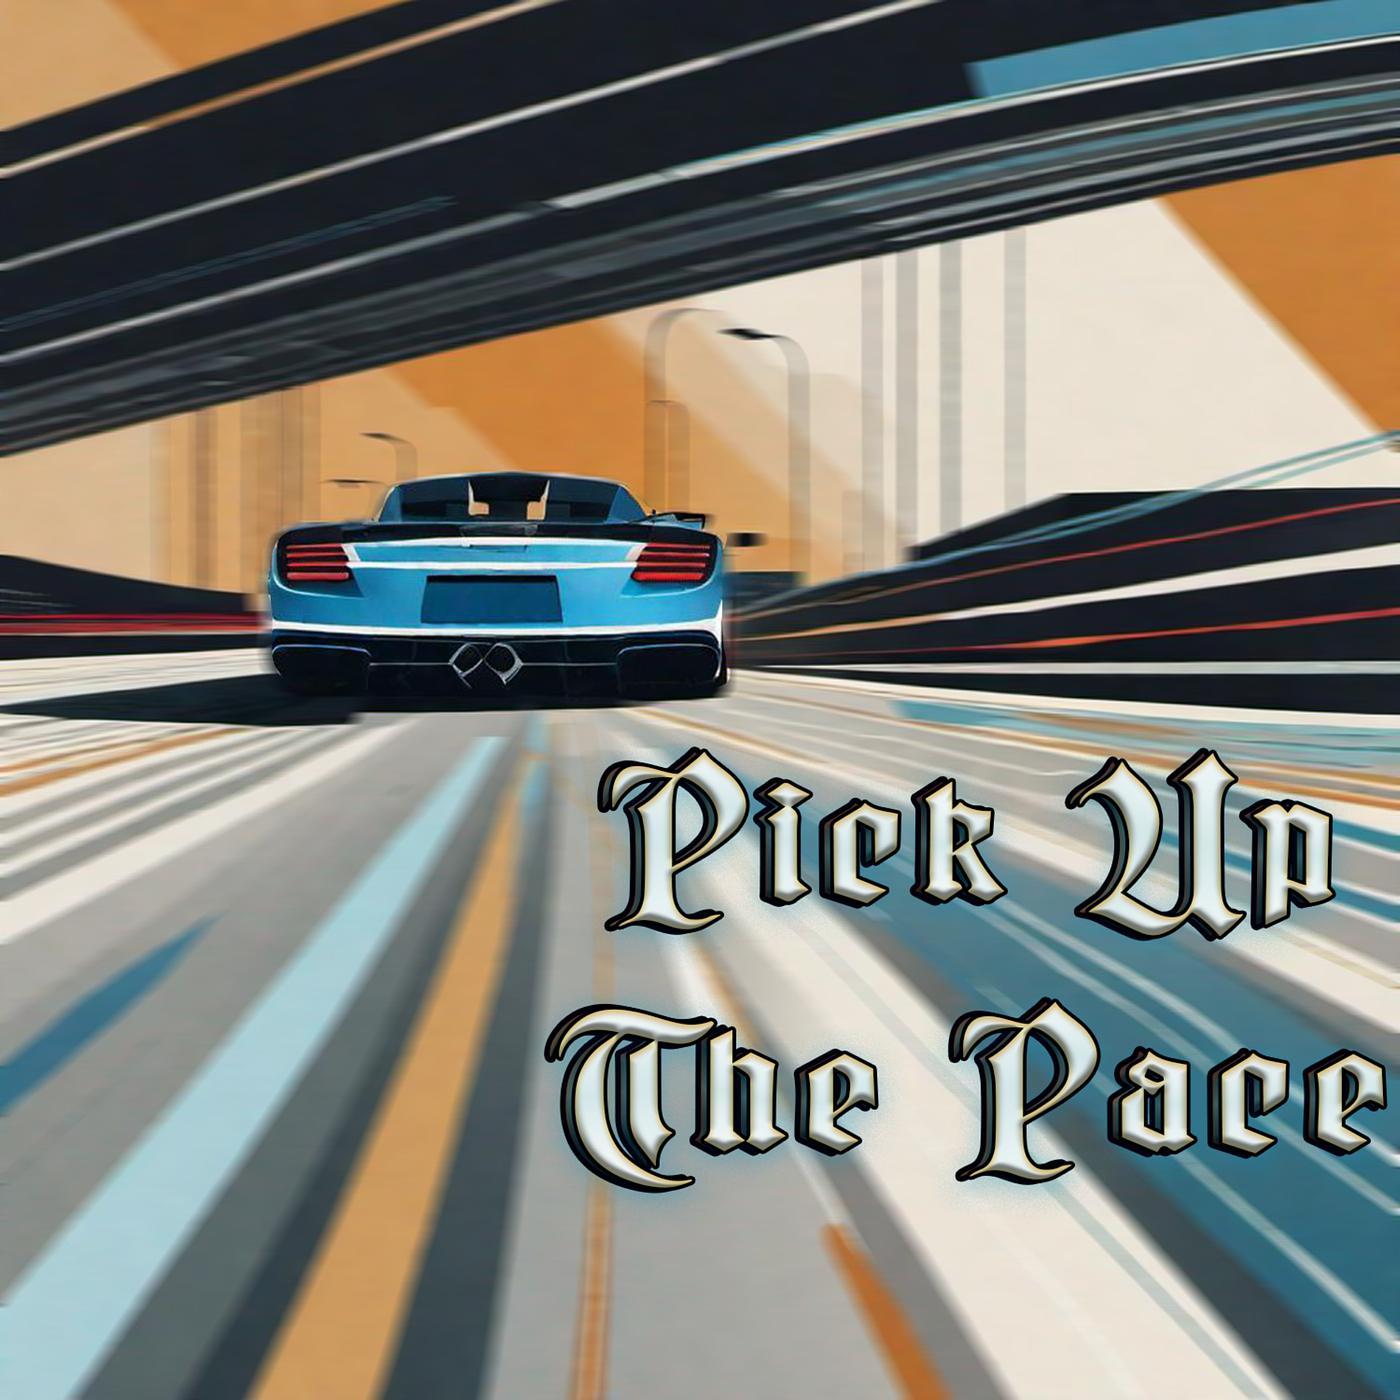 Постер альбома Pick up the Pace